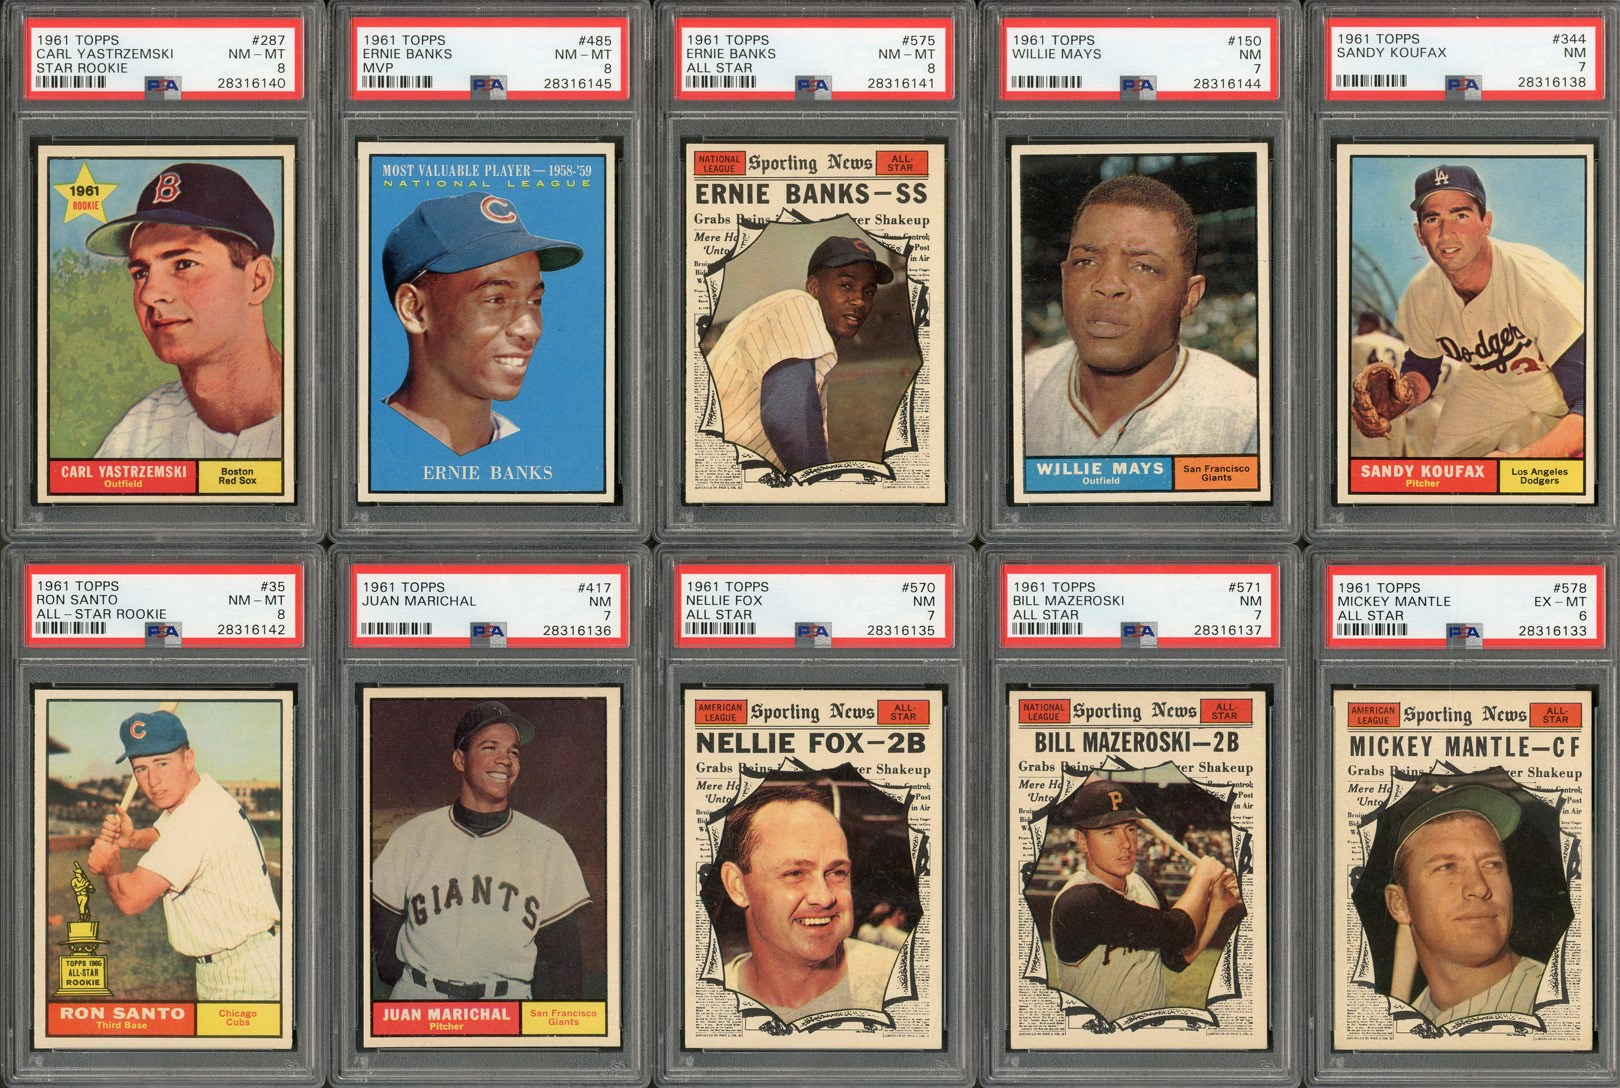 Baseball and Trading Cards - 1961 Topps HIGH GRADE Complete Set (587) 24-PSA Graded